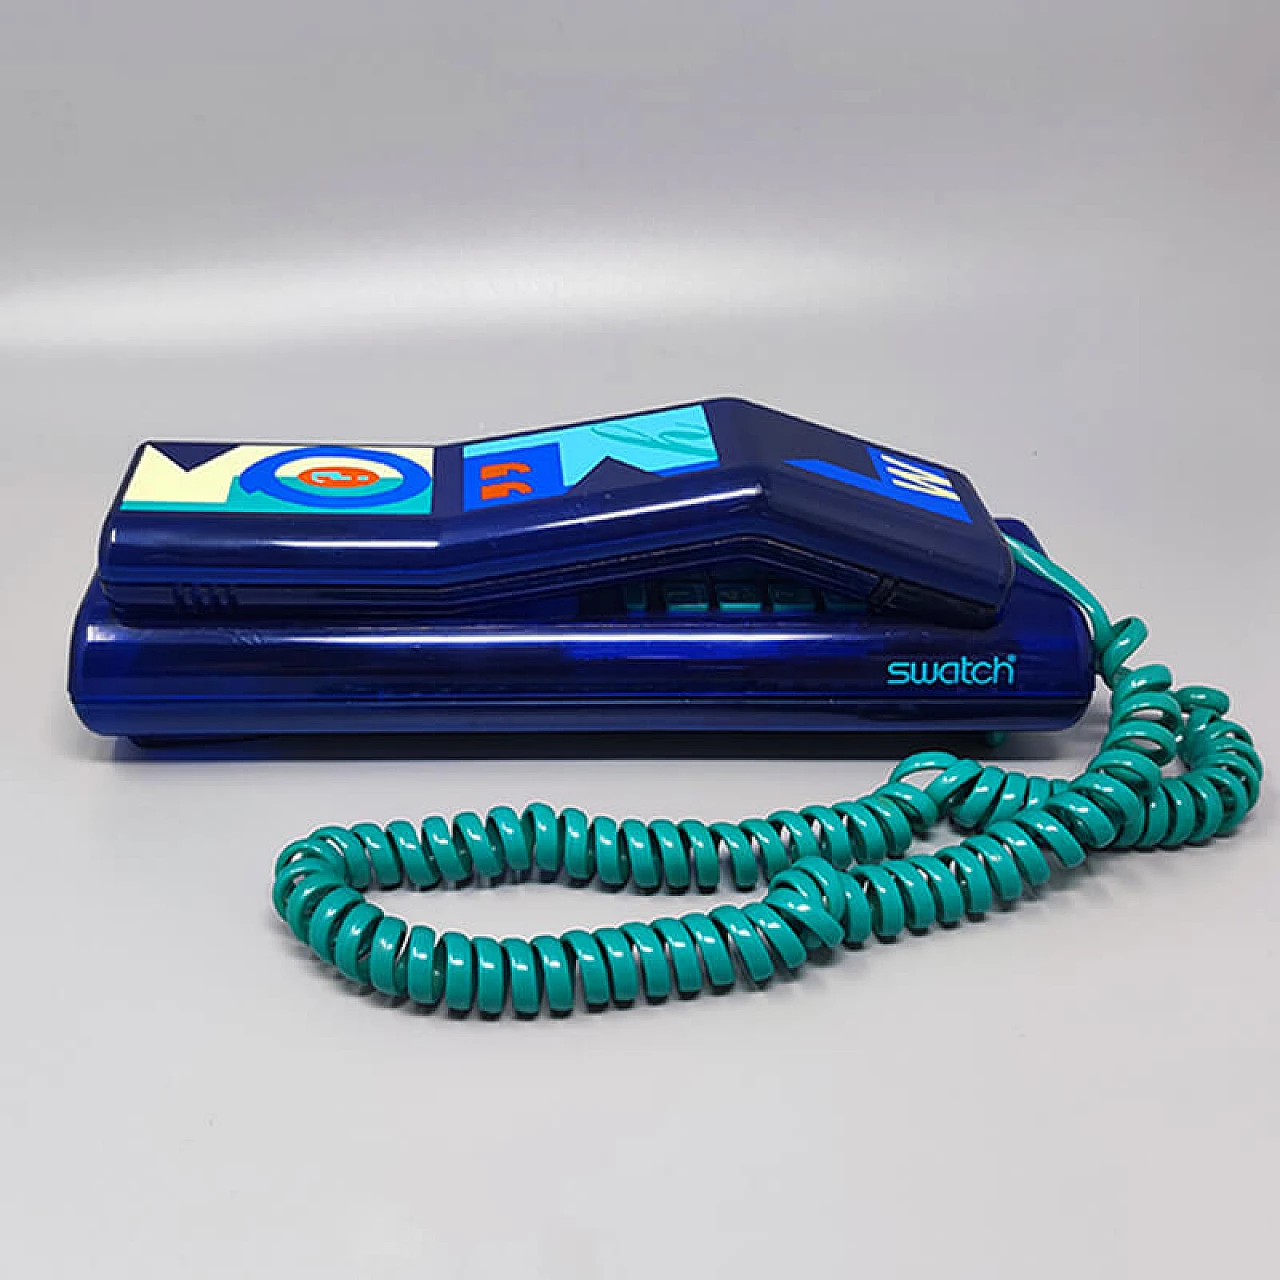 Swatch Twin Deluxe blue phone in Memphis-style, 1980s 3